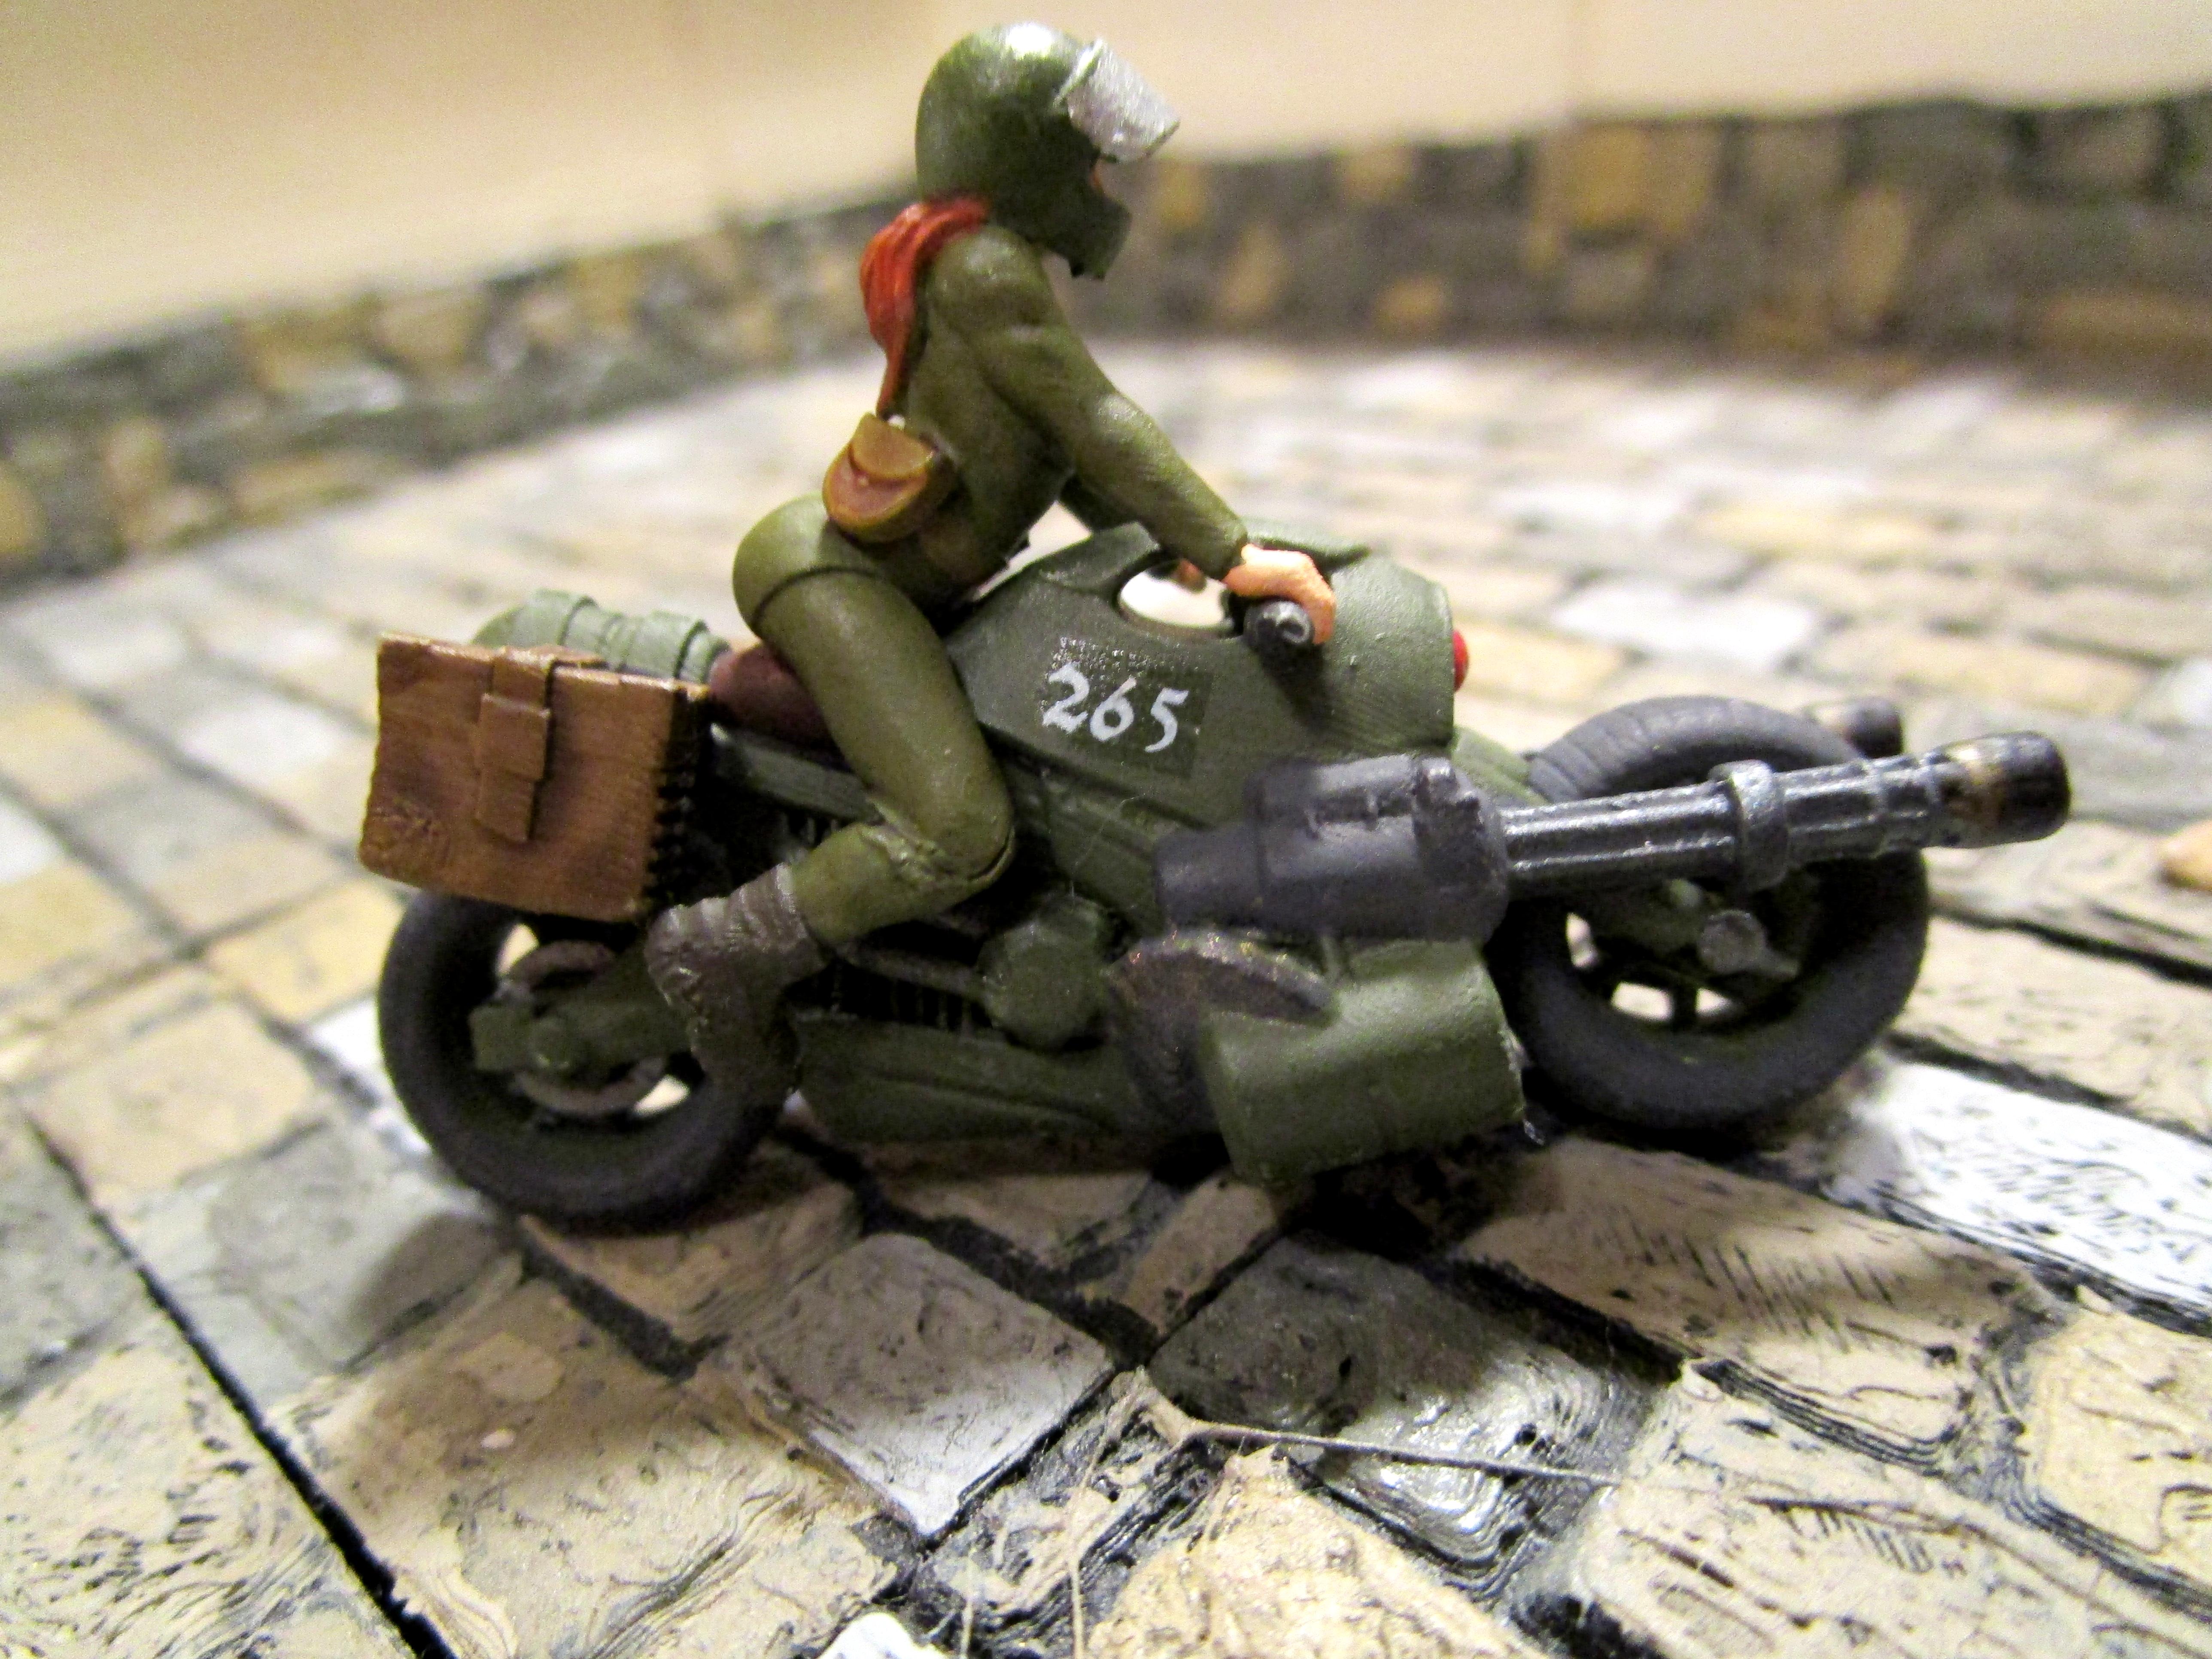 Bike, Chicks, Guard, Imperial, Motorcycles, Riders, Rough